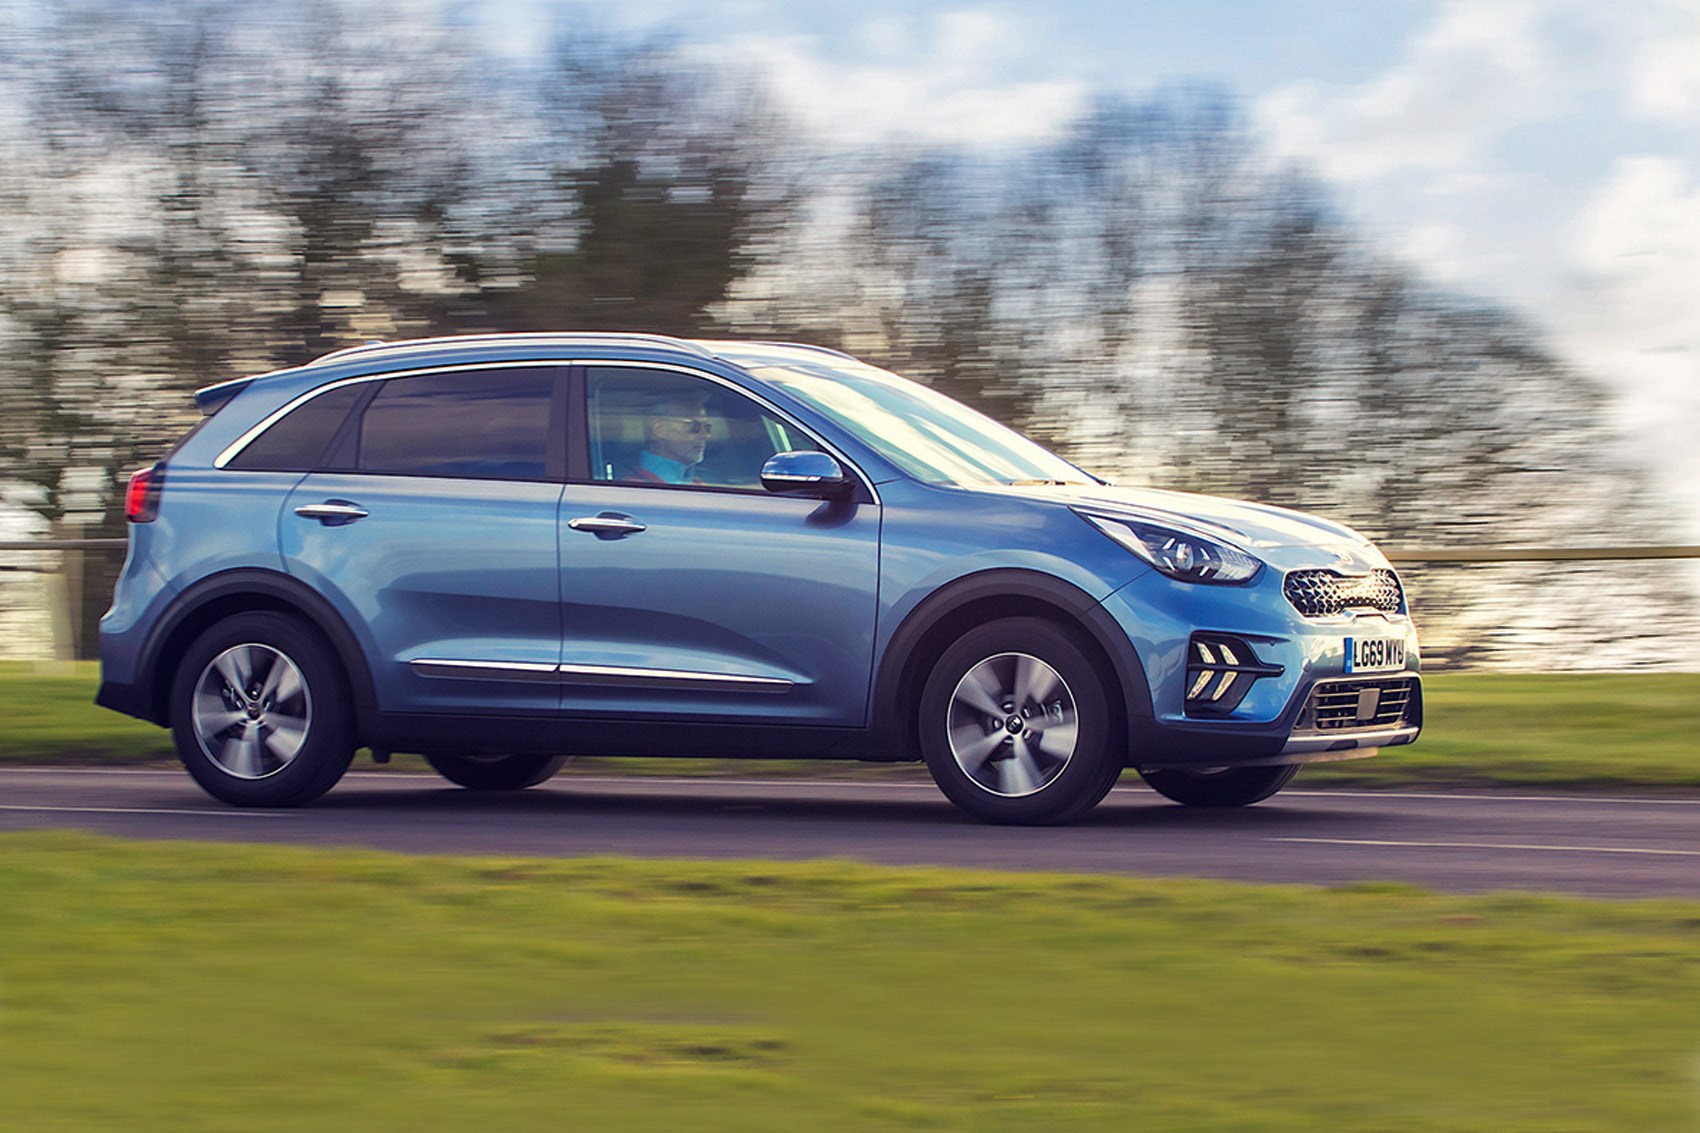 2020 Kia Niro PHEV Test Drive Review: Best Of Both Worlds?